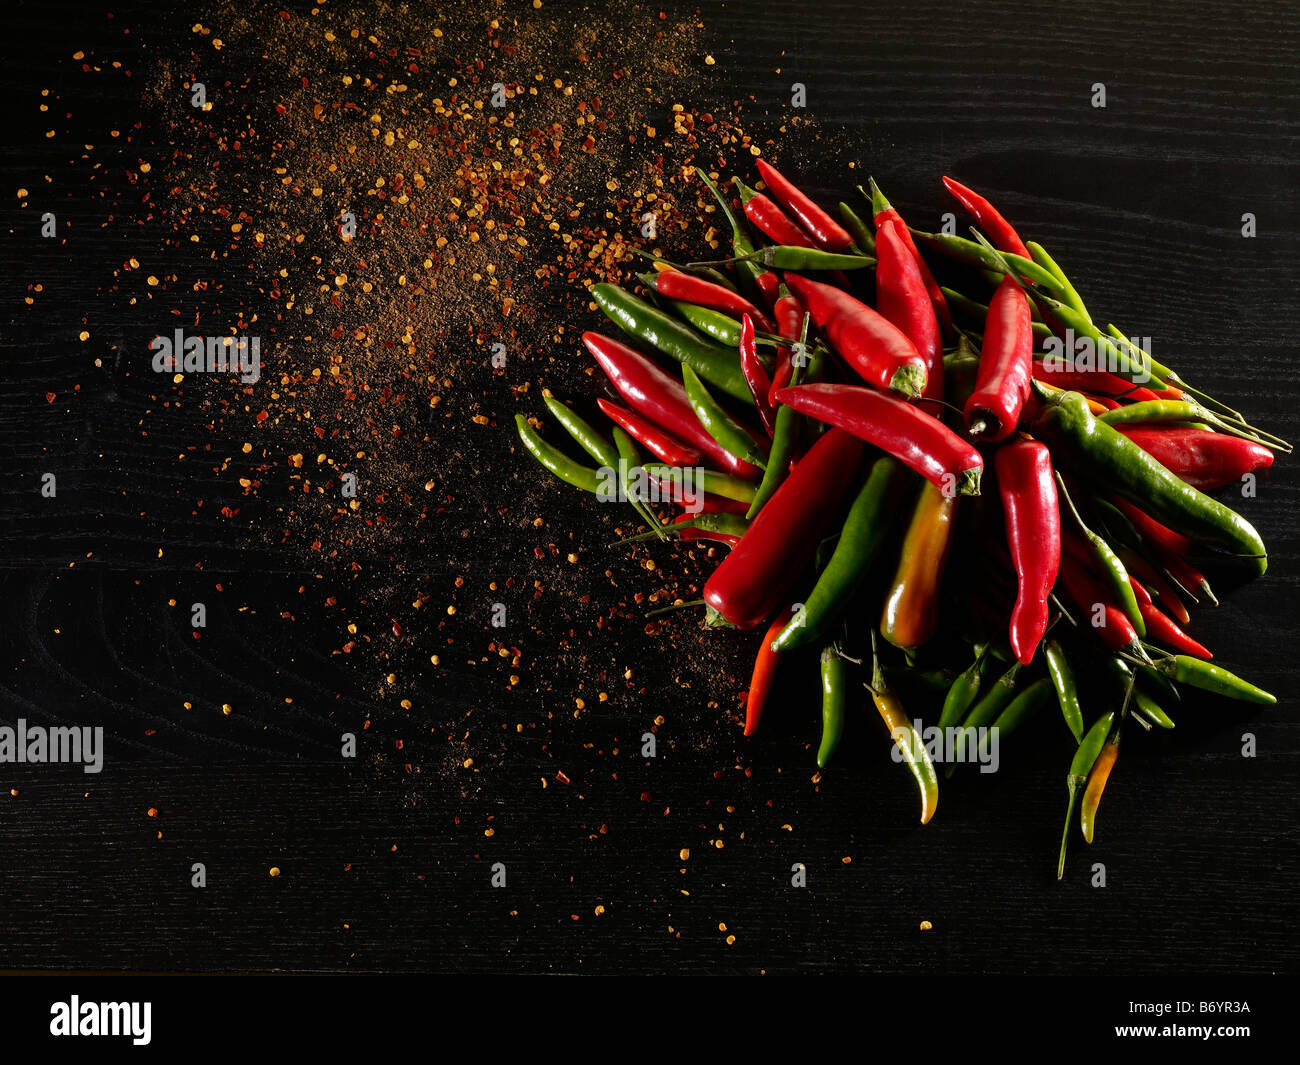 Red and Green chilli peppers Stock Photo